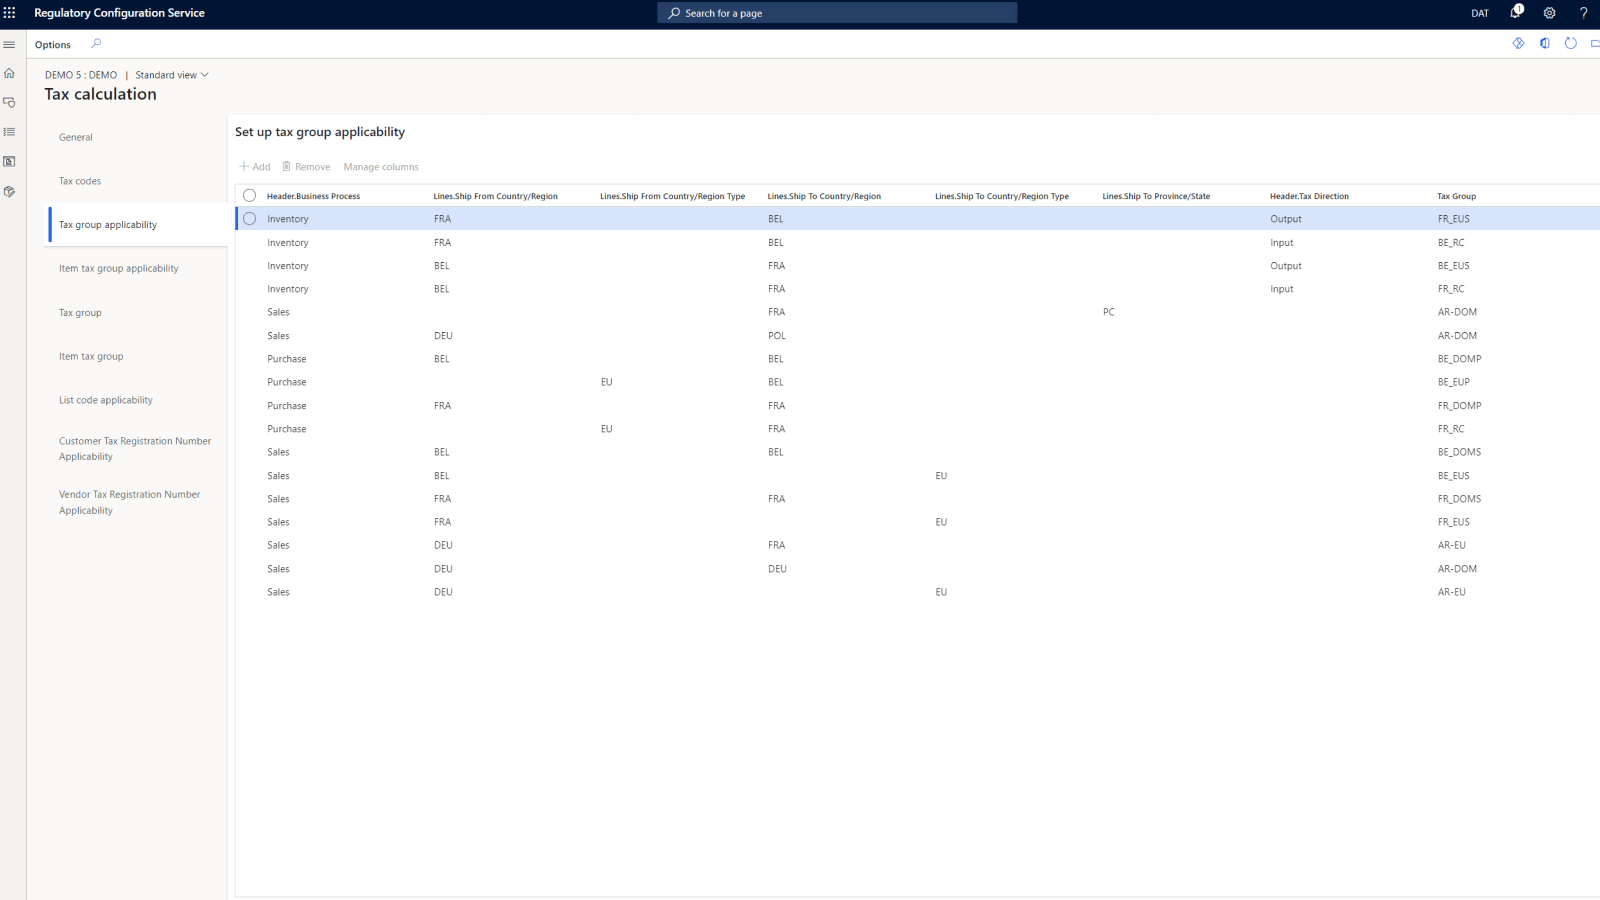 Image of tax calculation dashboard